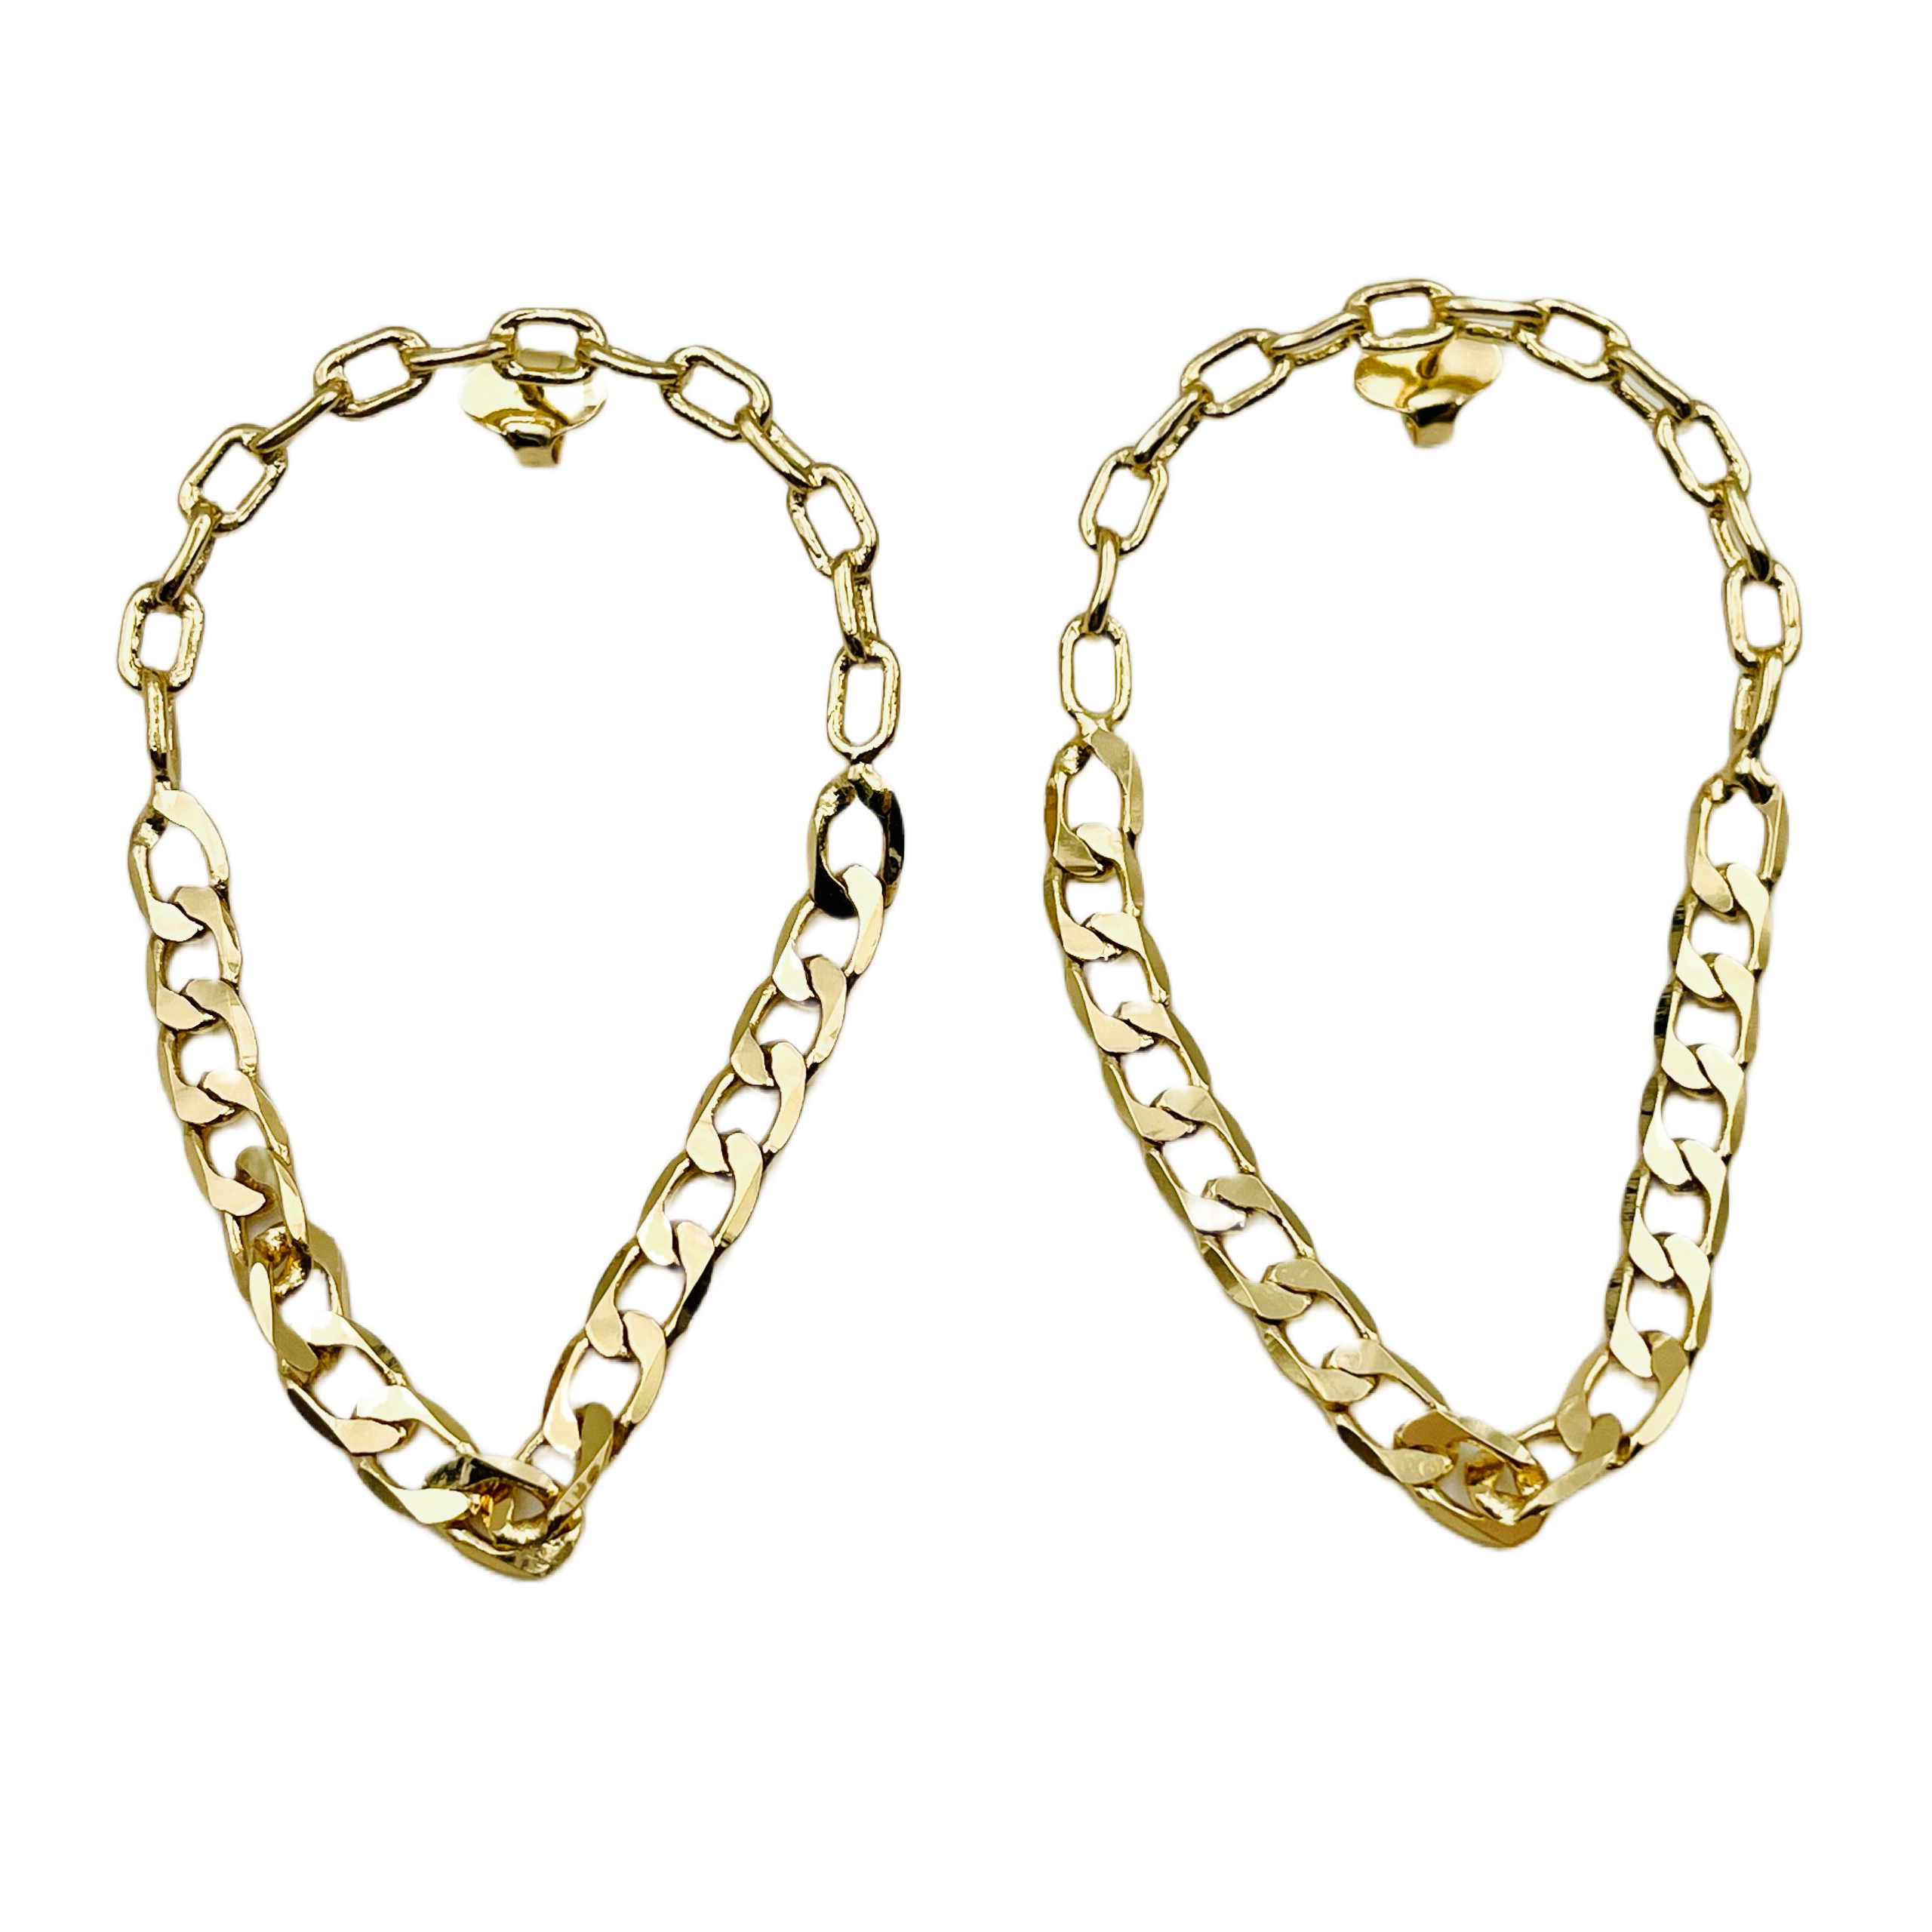 Chained Gold Earrings